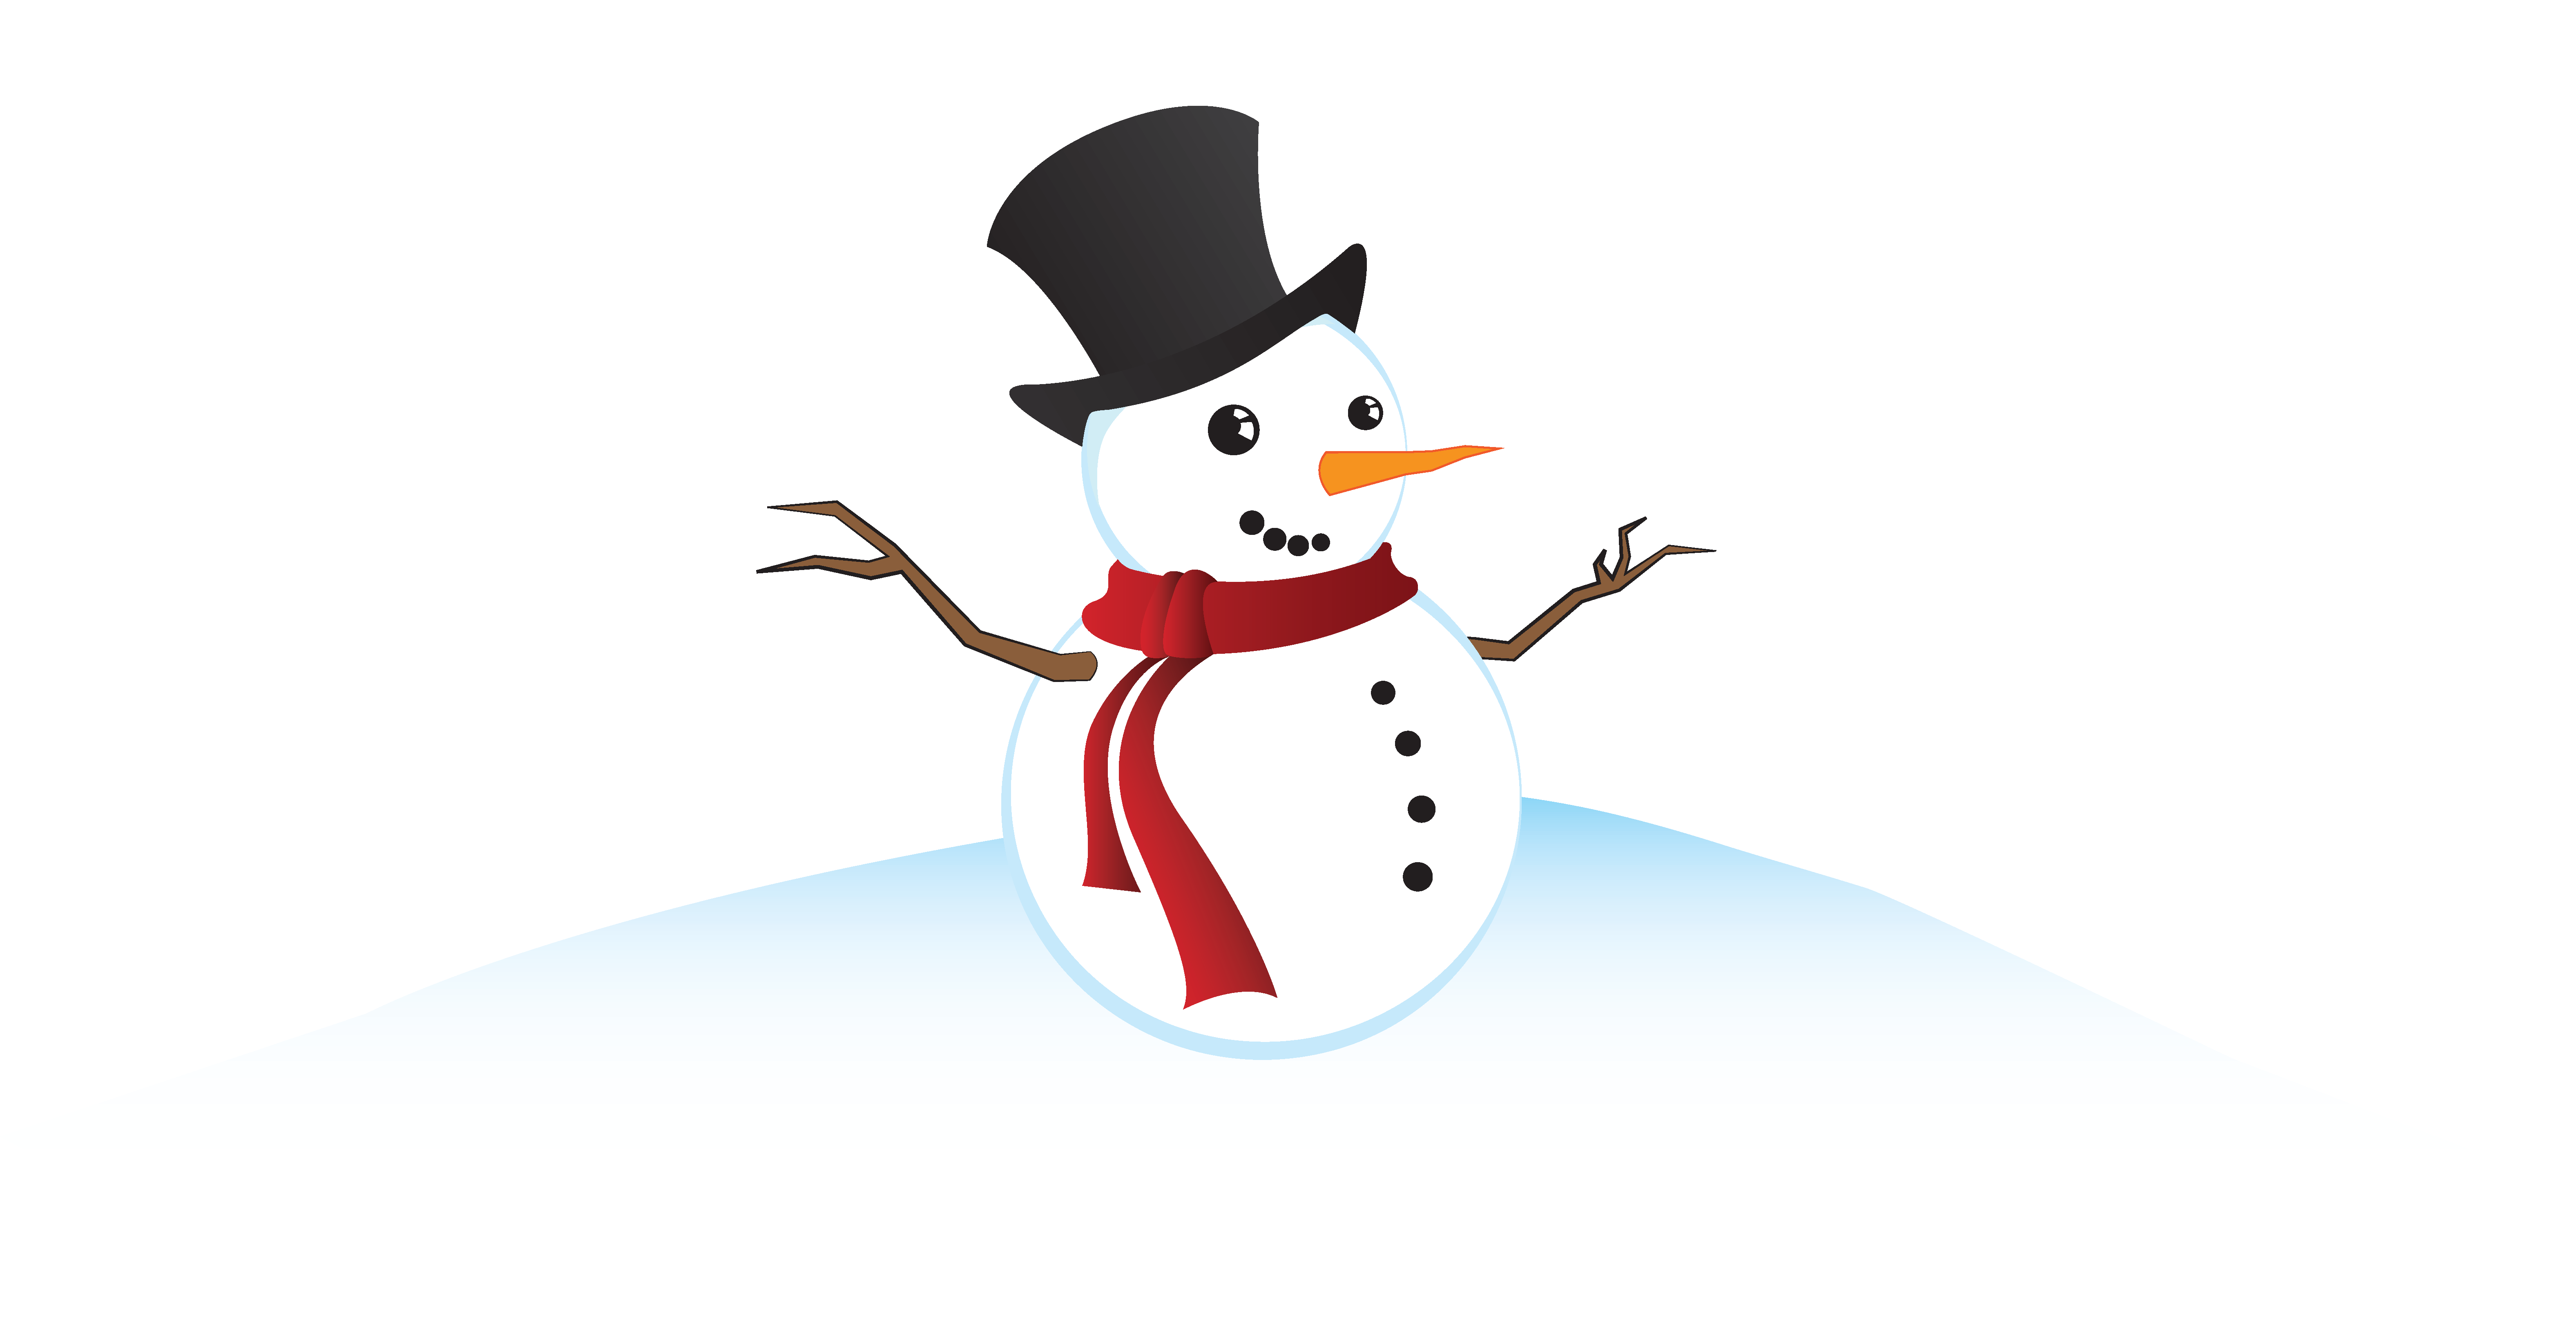 The great snowman building. Win clipart hospital window